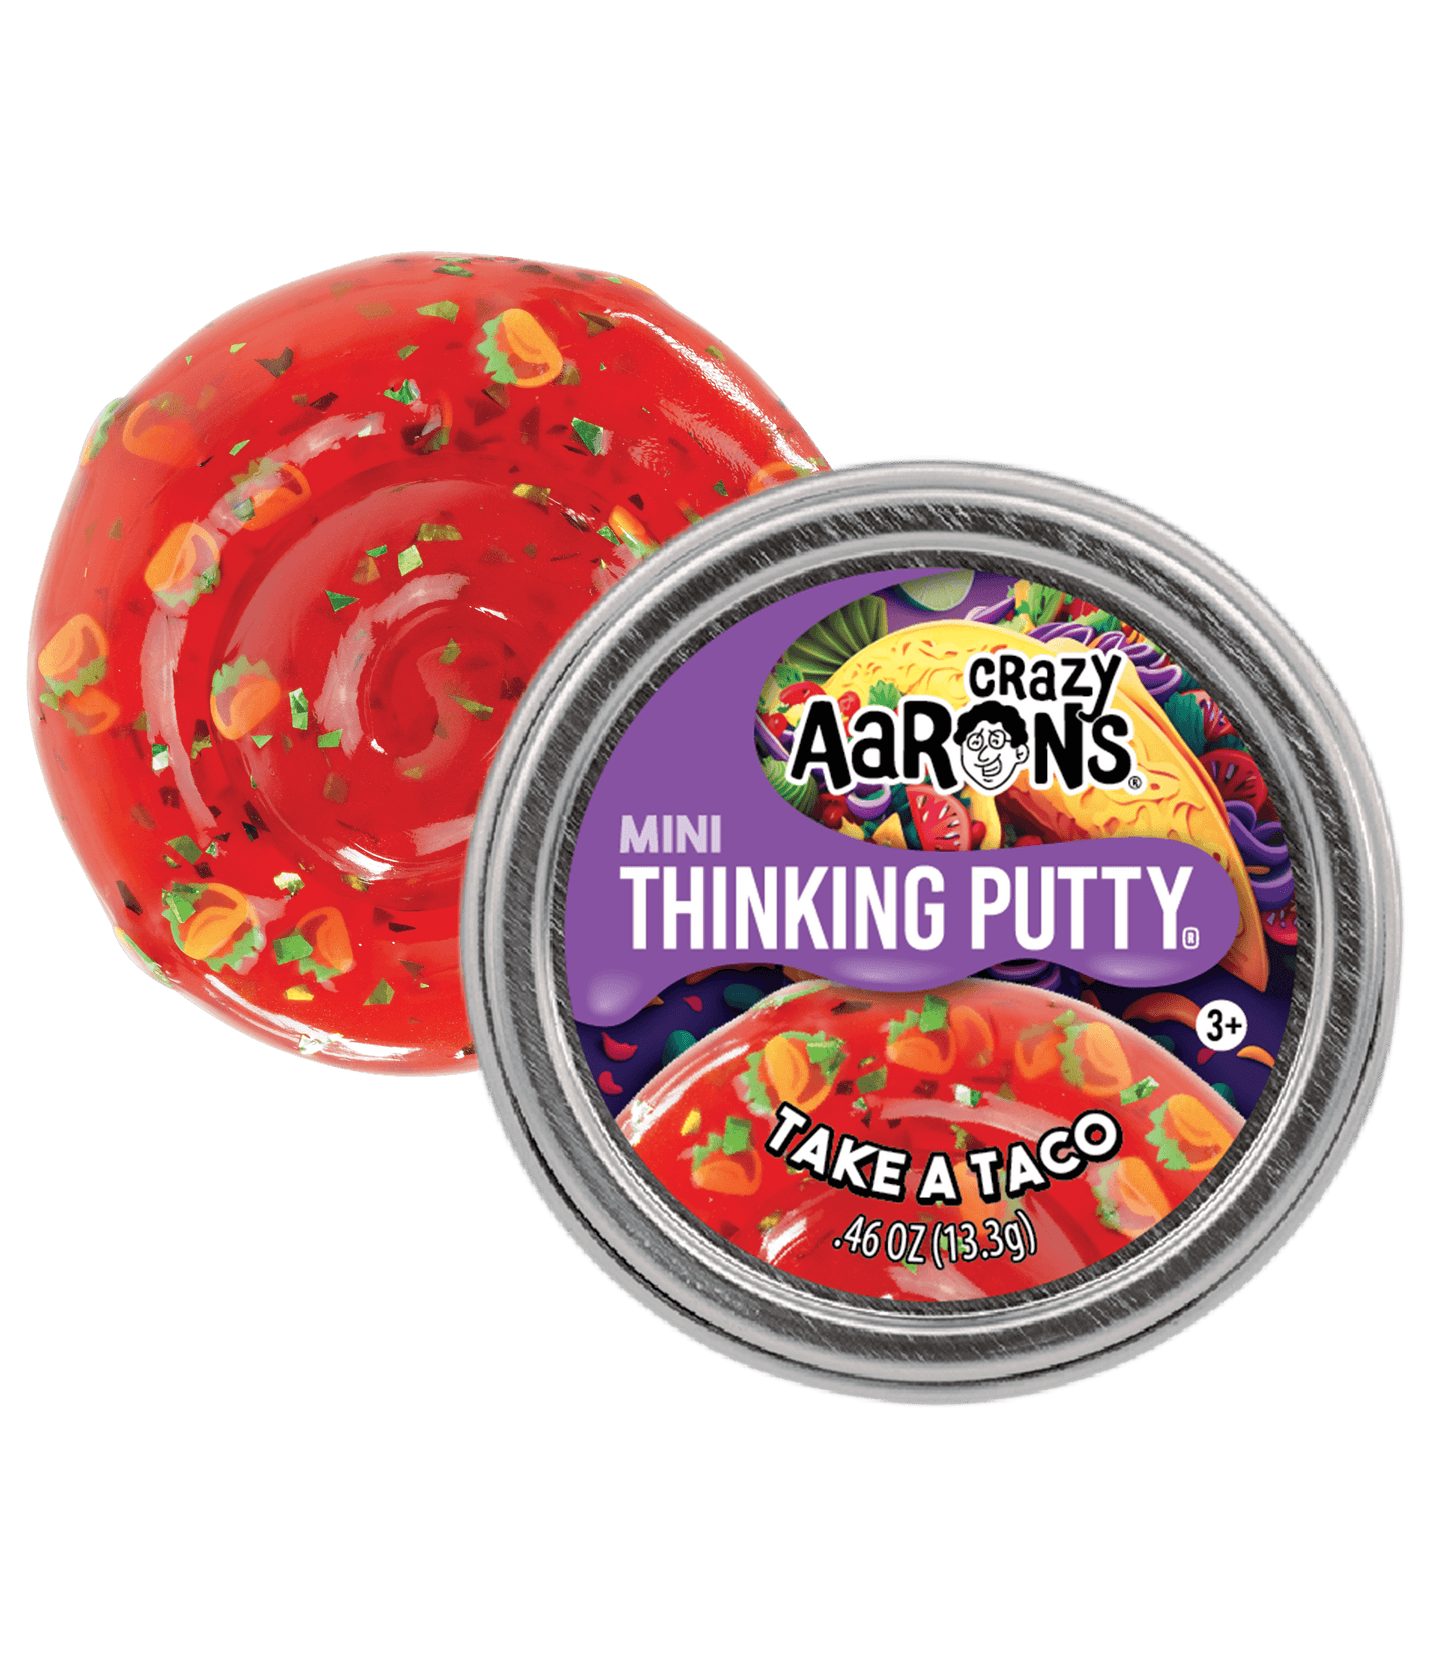 Take A Taco 2” Tin Thinking Putty by Crazy Aaron’s #TC003